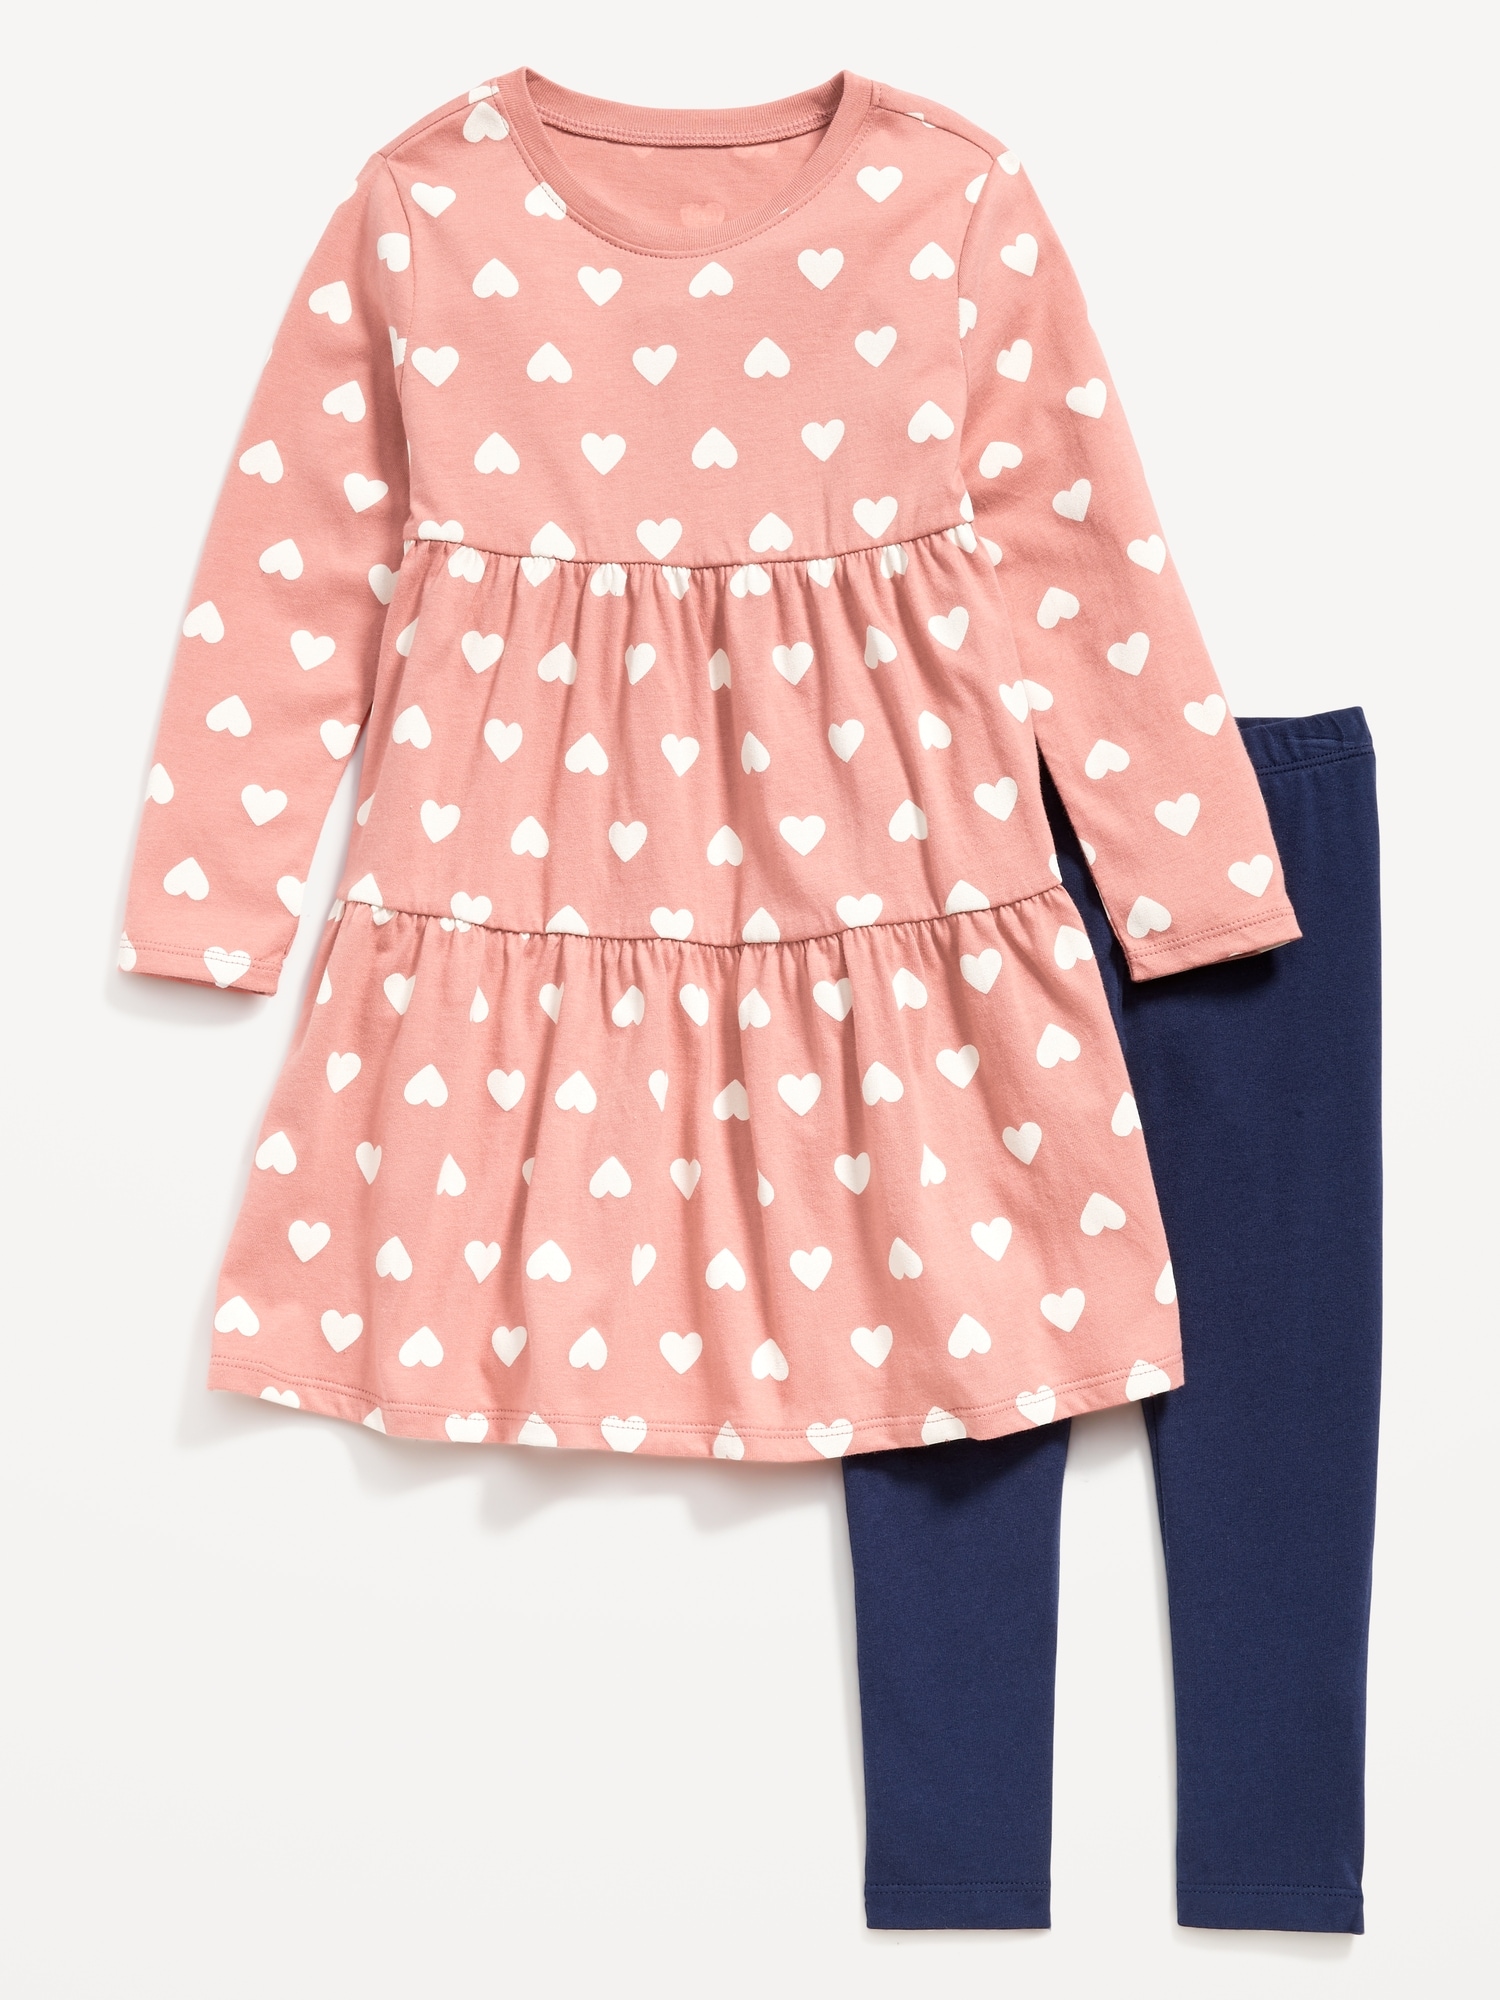 PDM7458, Toddlers' Gathered Tops, Dresses and Leggings